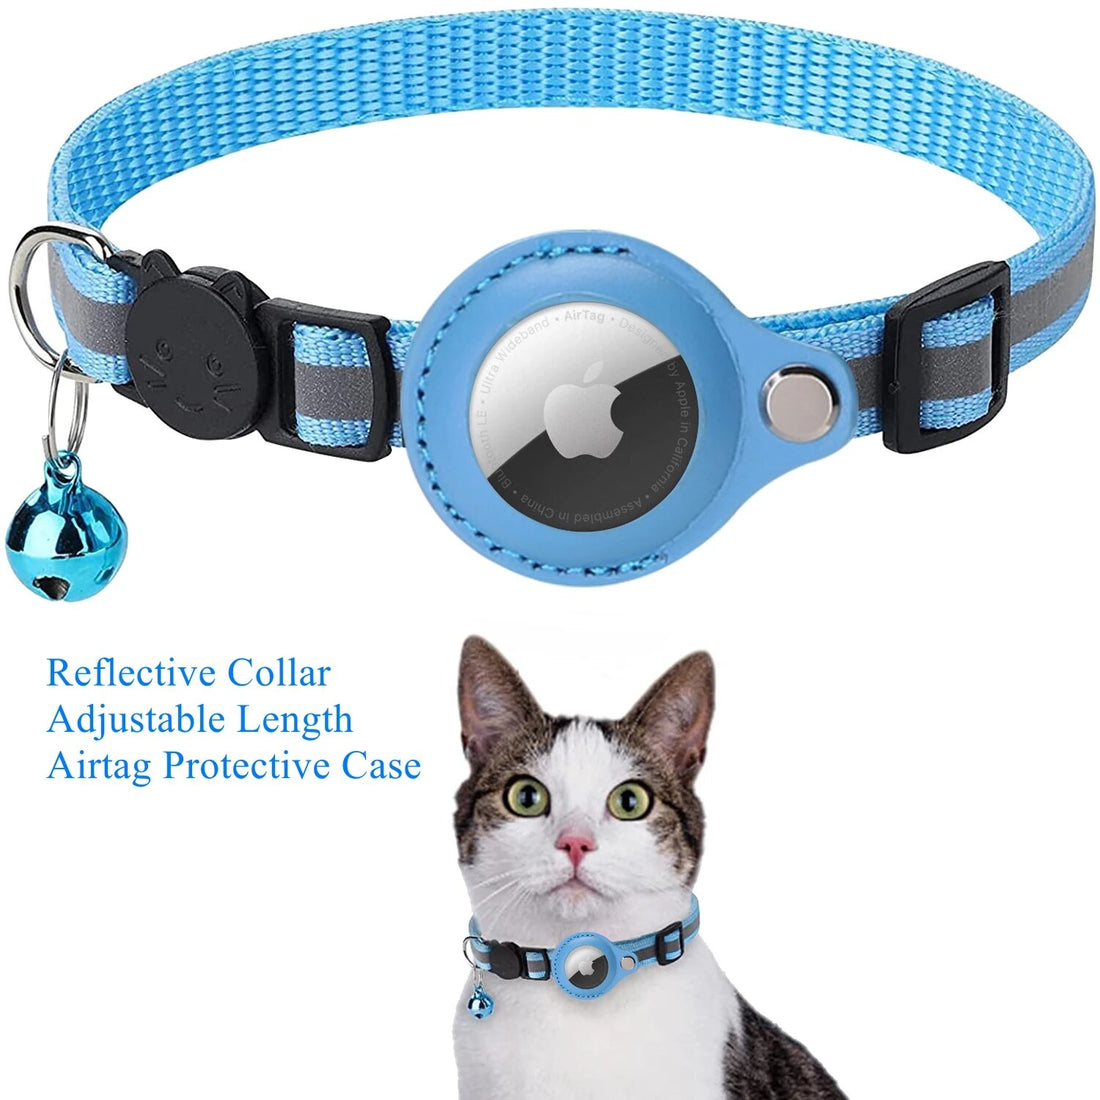 Anti-Lost Cat Collar for Apple AirTag - Waterproof, Reflective, with Bell and Protective Case